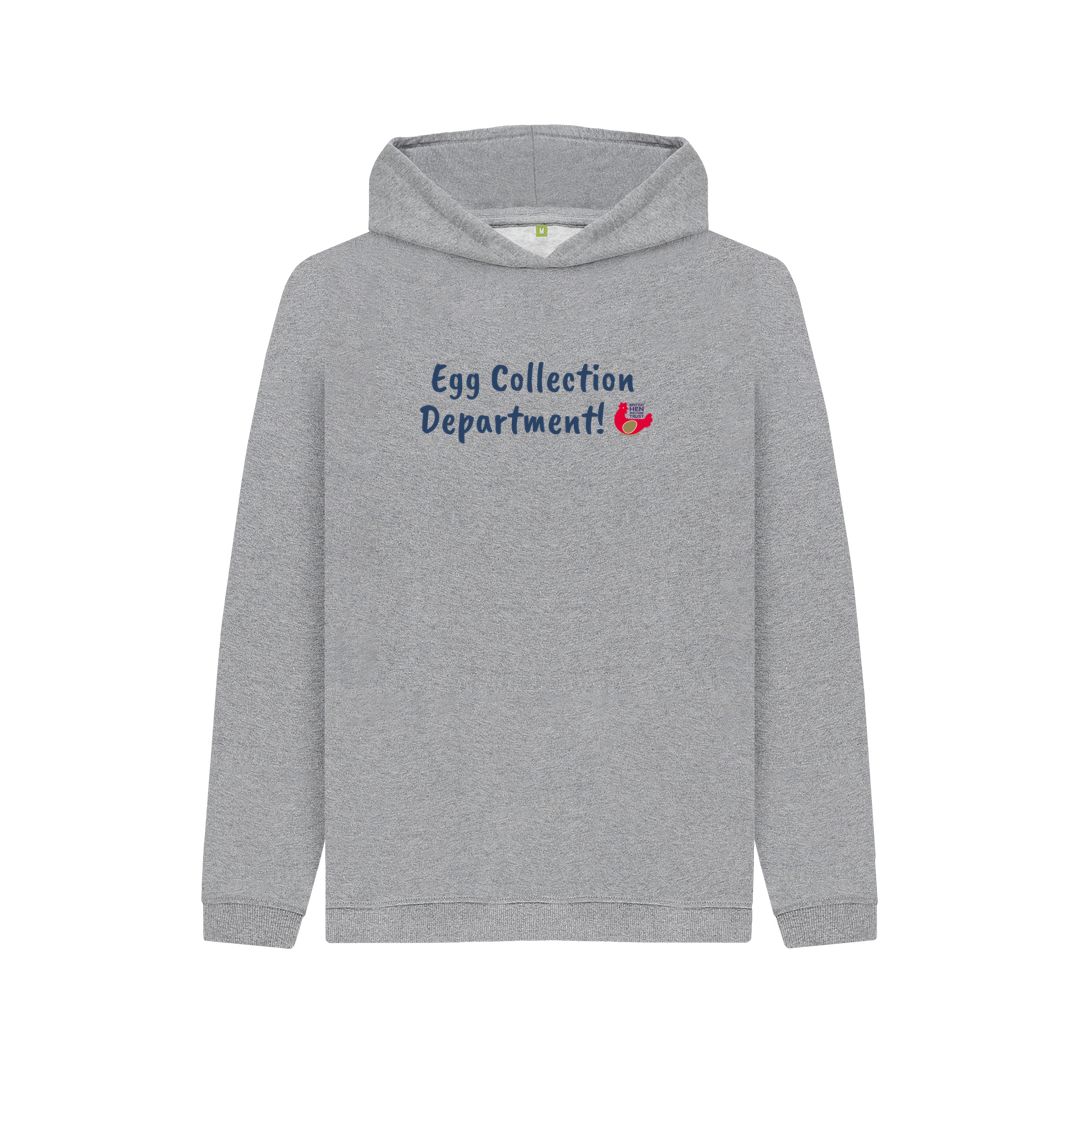 Athletic Grey Egg Collection Department! Kids Unisex Hoodie